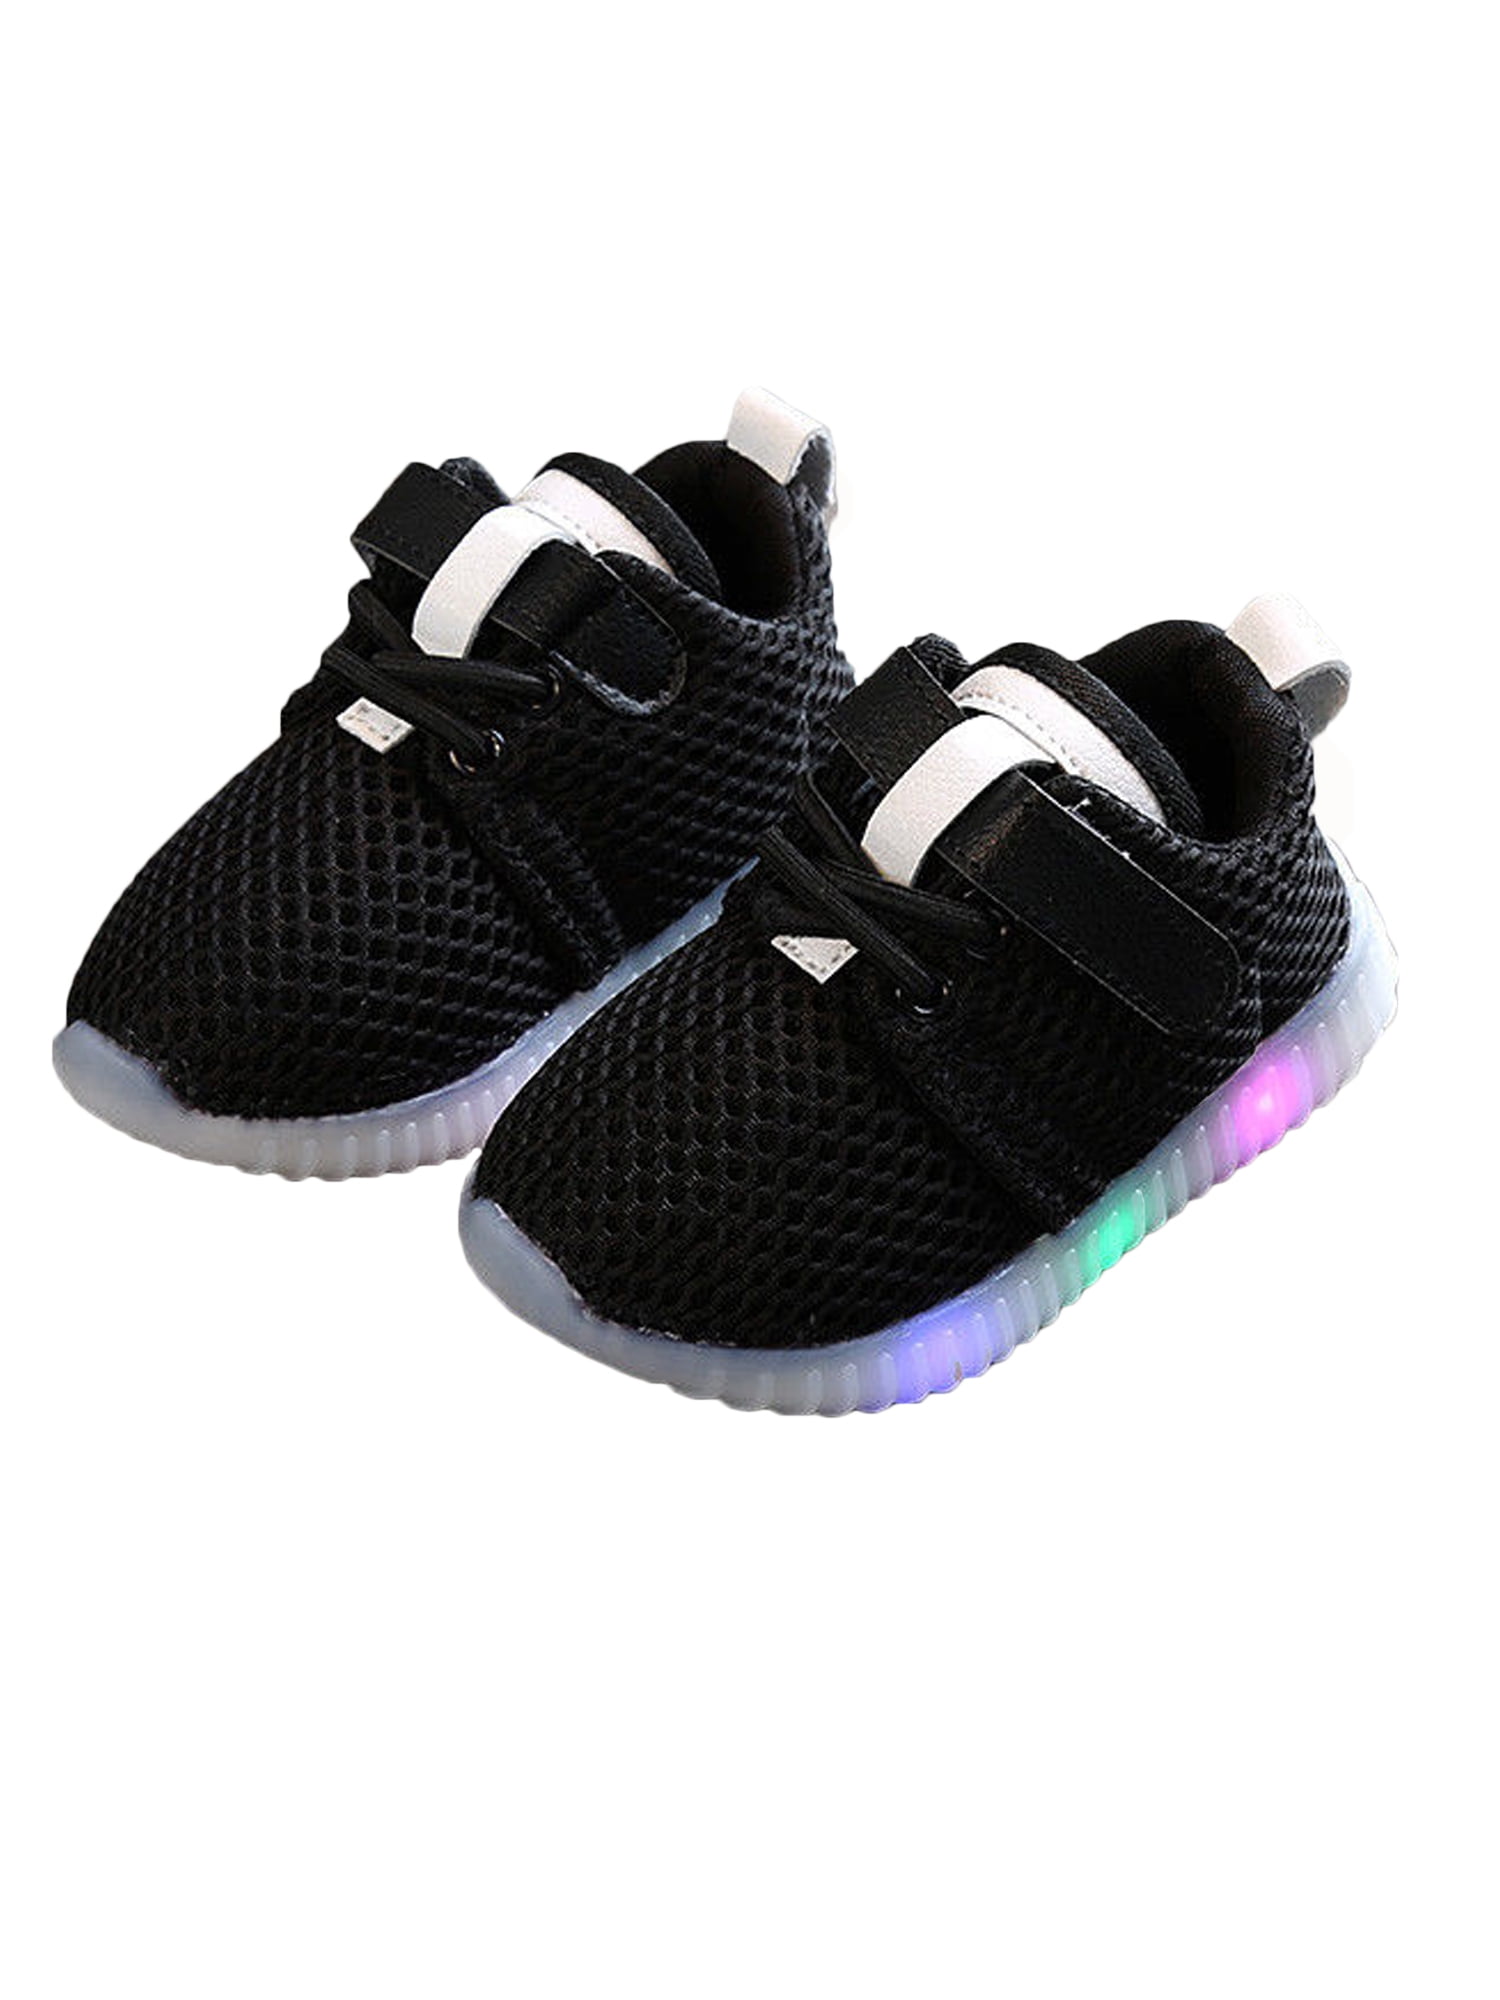 Toddler Kids Boys Girls Baby Light Up Flashing LED Shoes Mesh Trainers Sneakers 